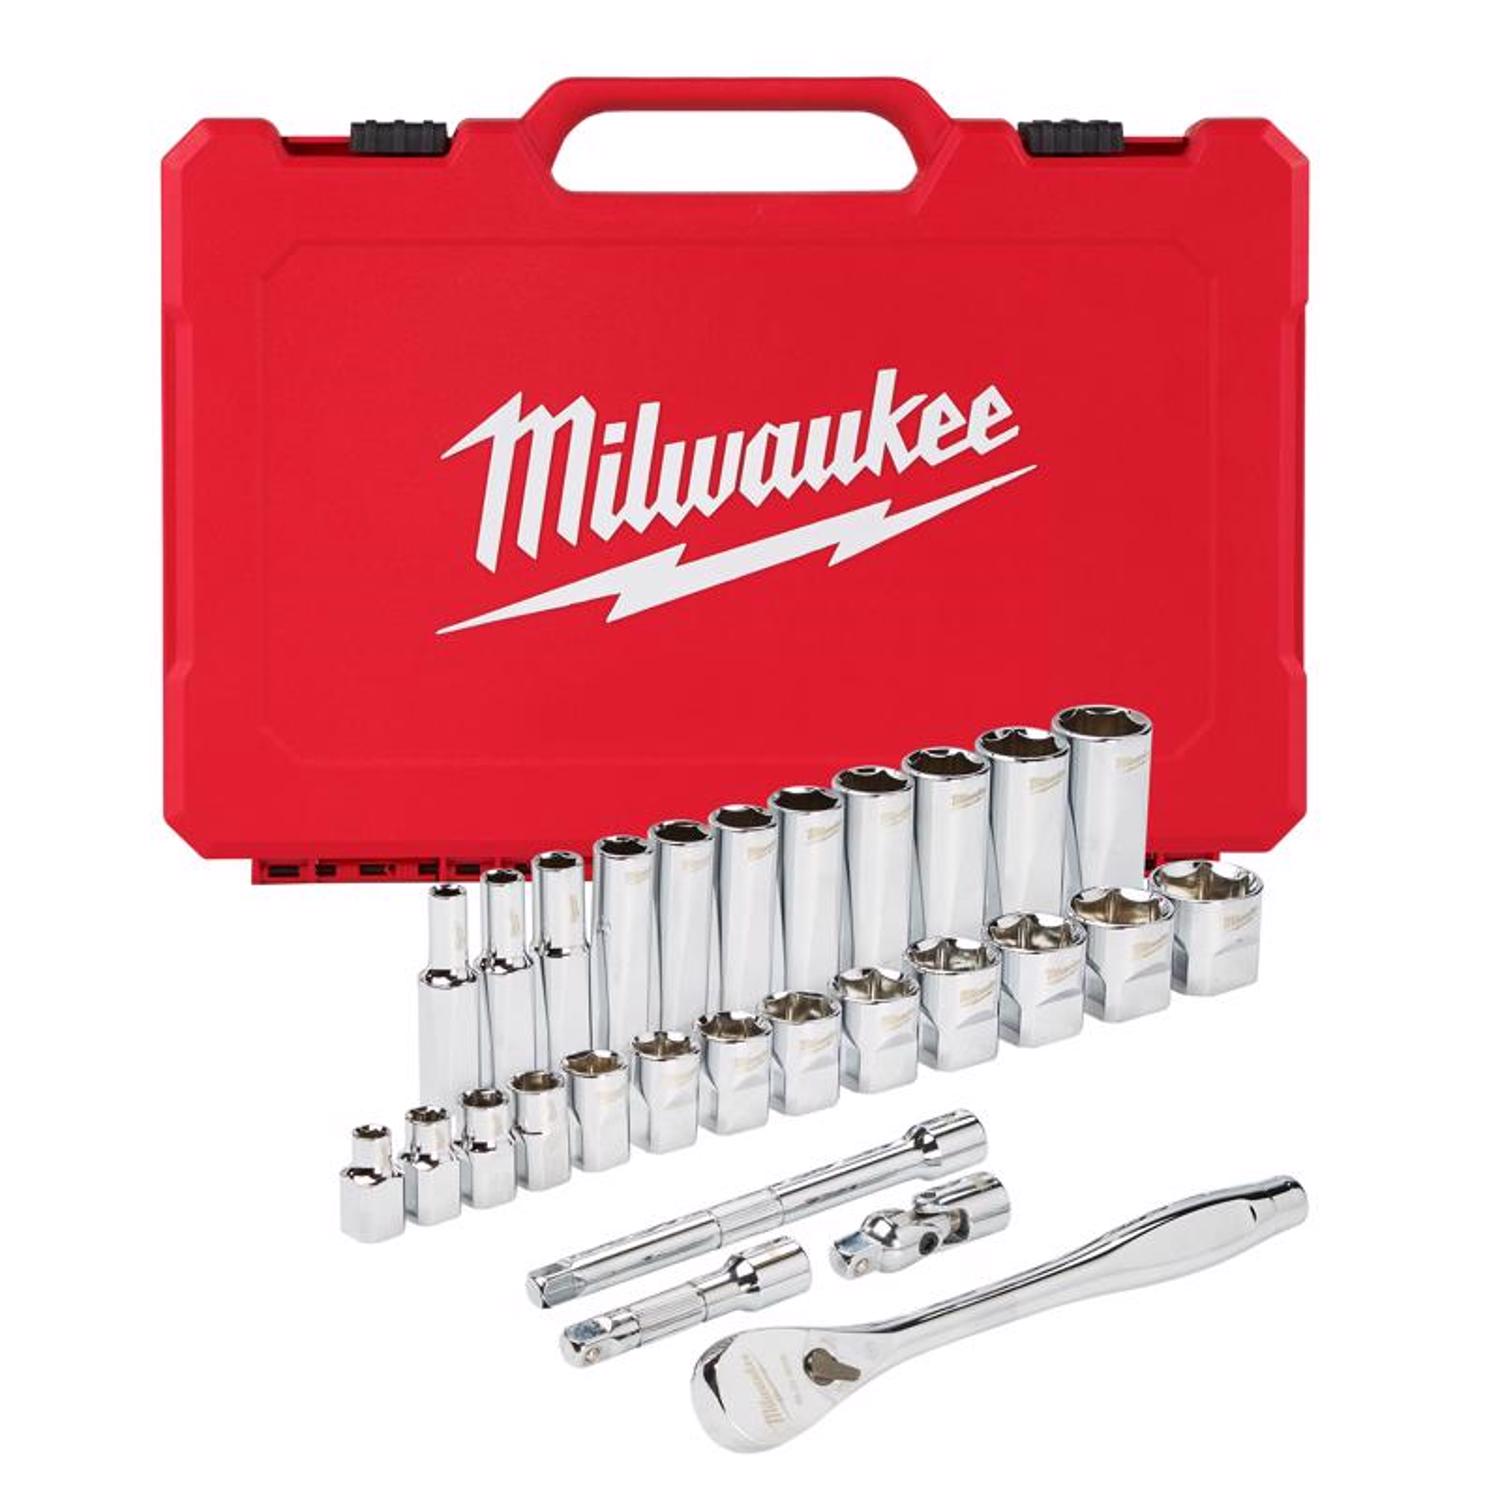 Milwaukee 3/8 in. drive SAE Ratchet and Socket Set